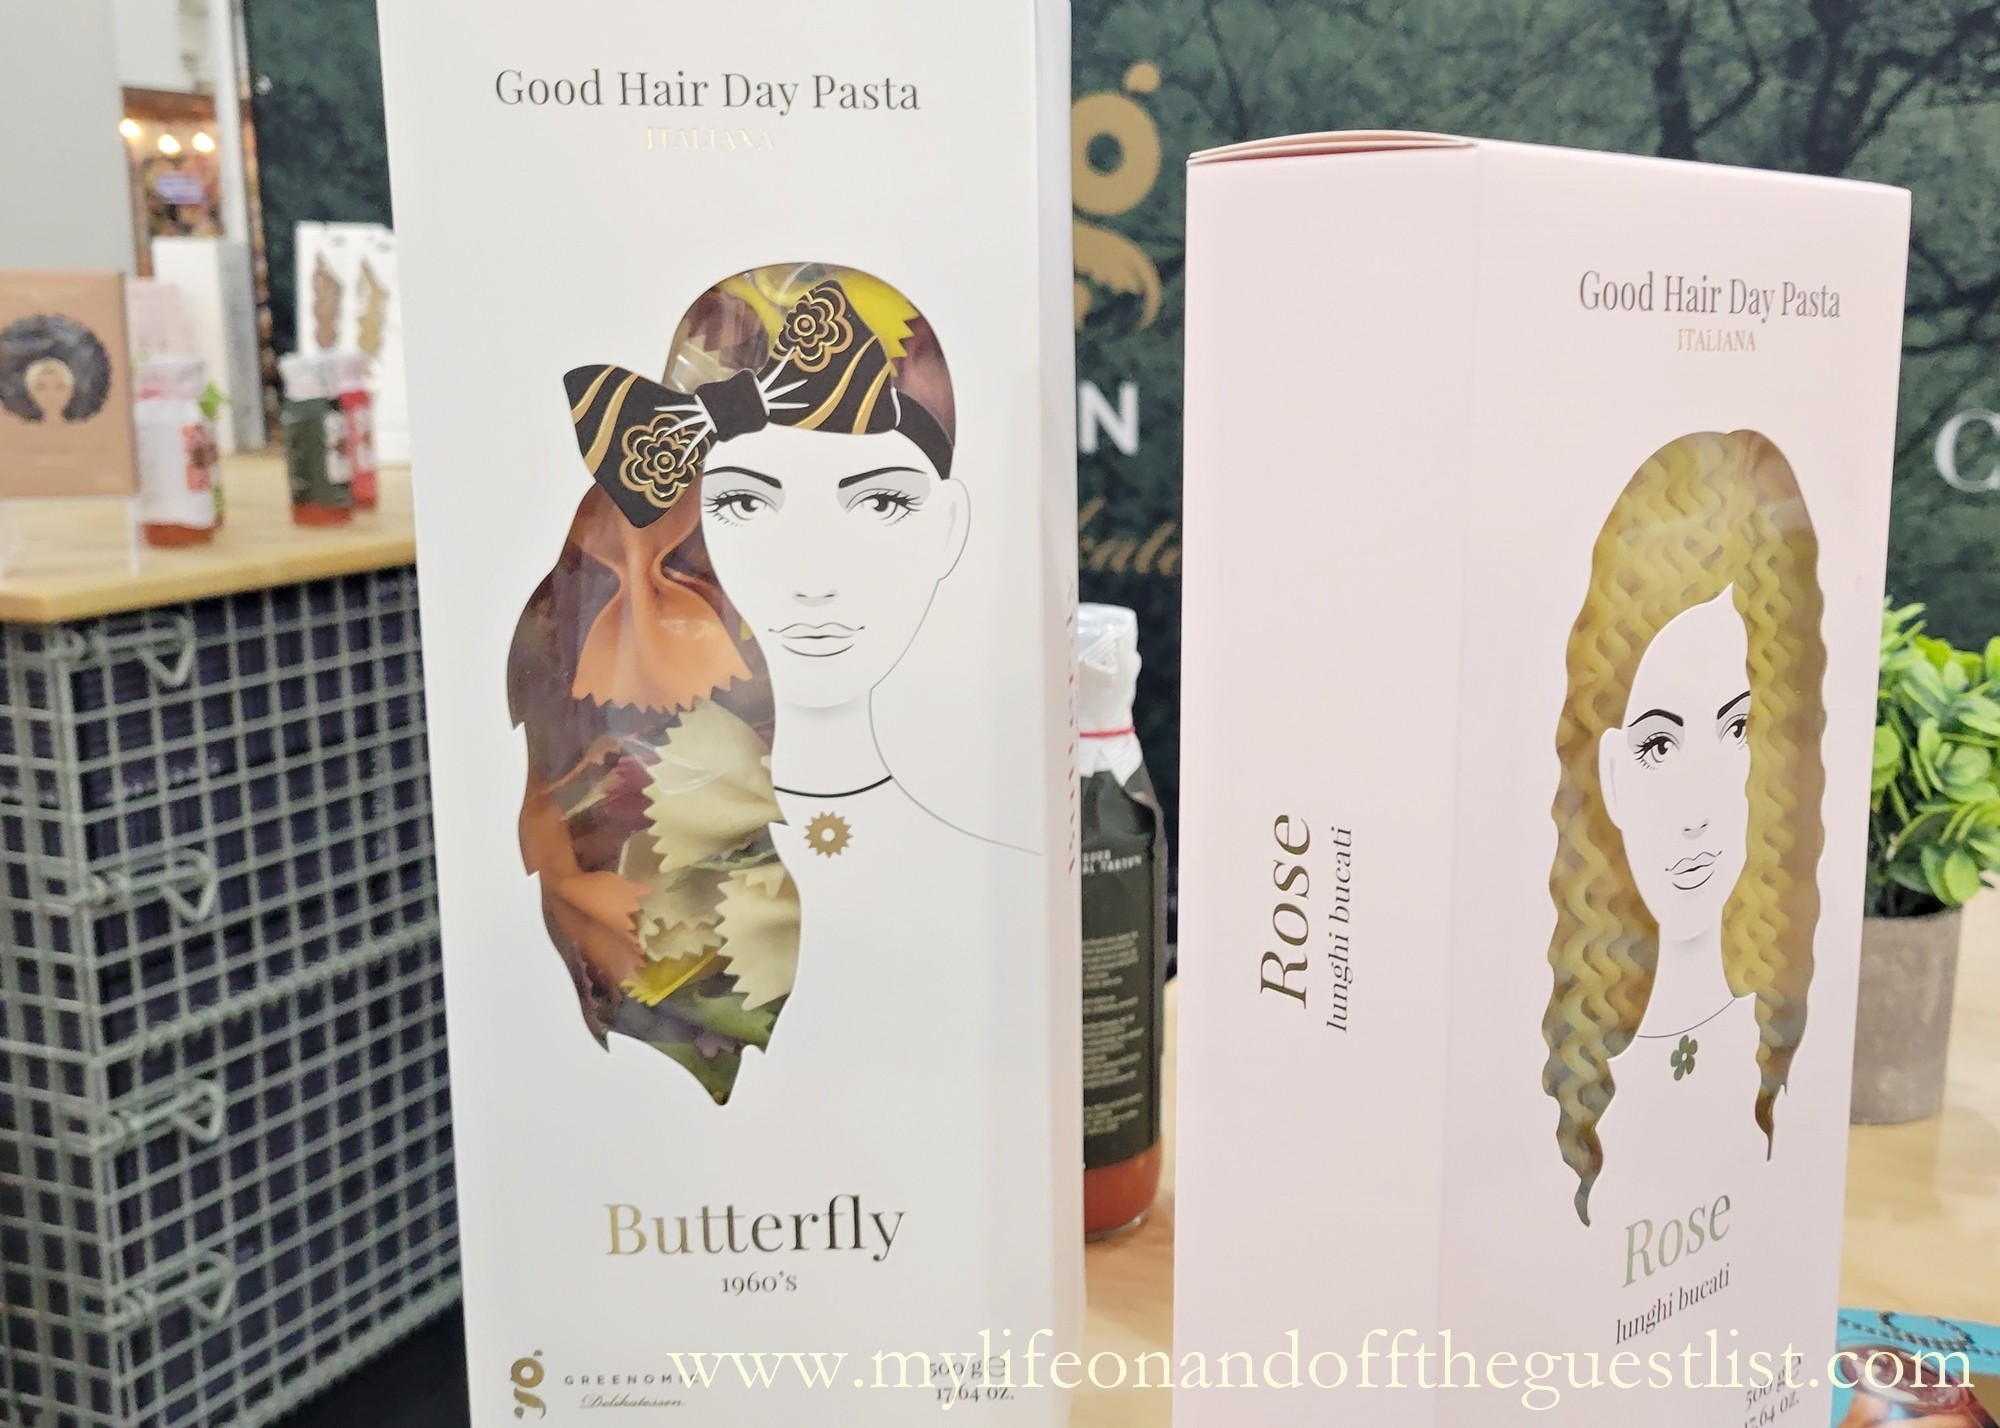 Choose the Good Life. Choose Good Hair Day Pasta Collection